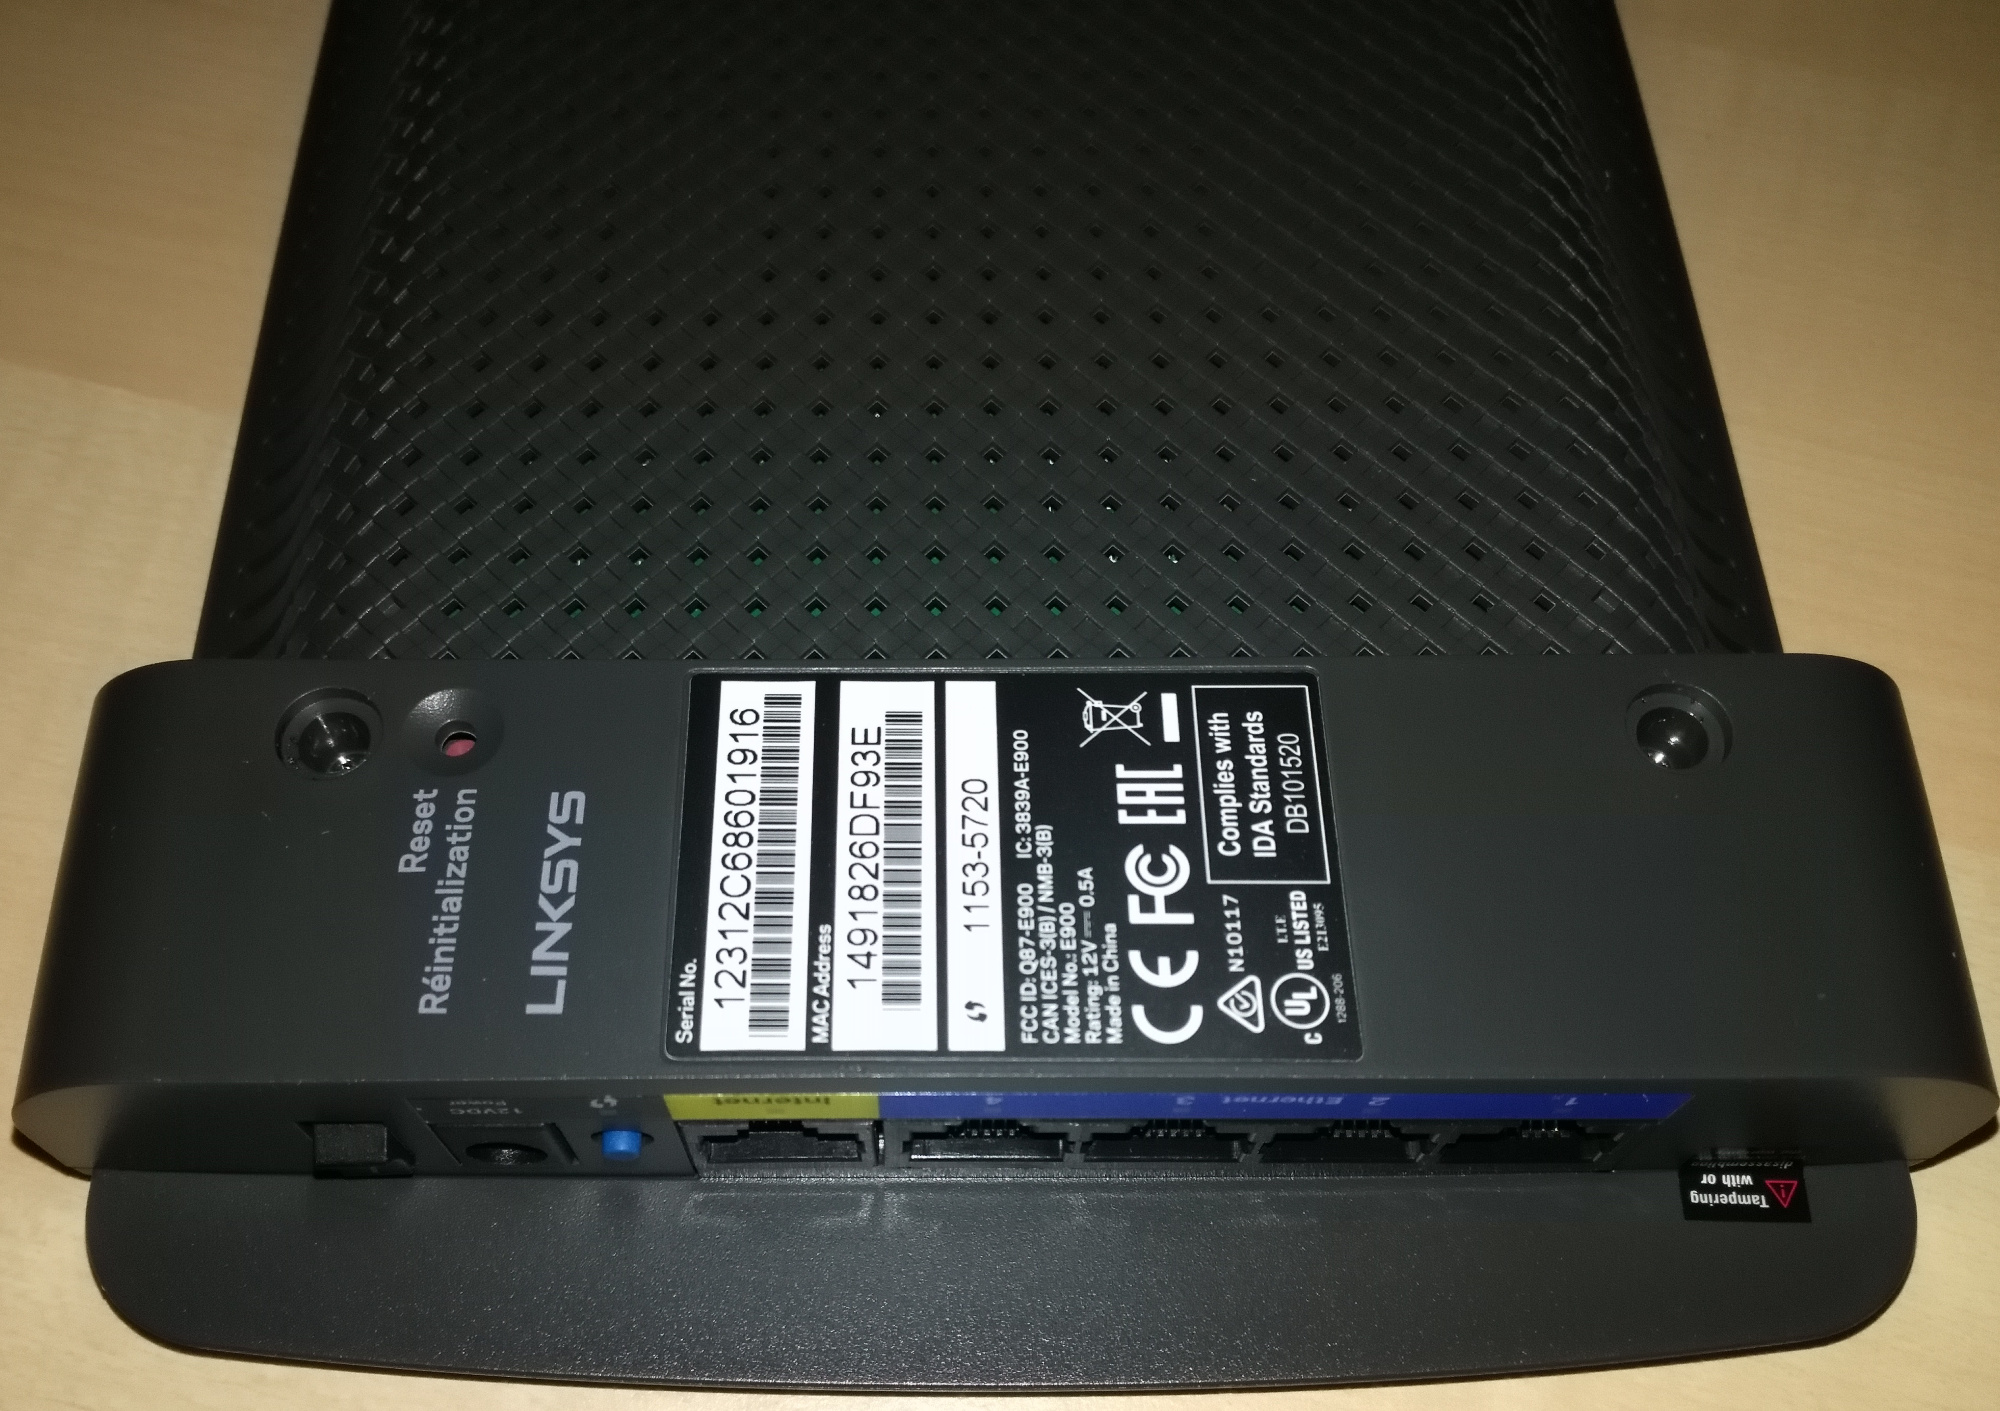 Hacking – Root @ Linksys E900 N300 – NM-Projects